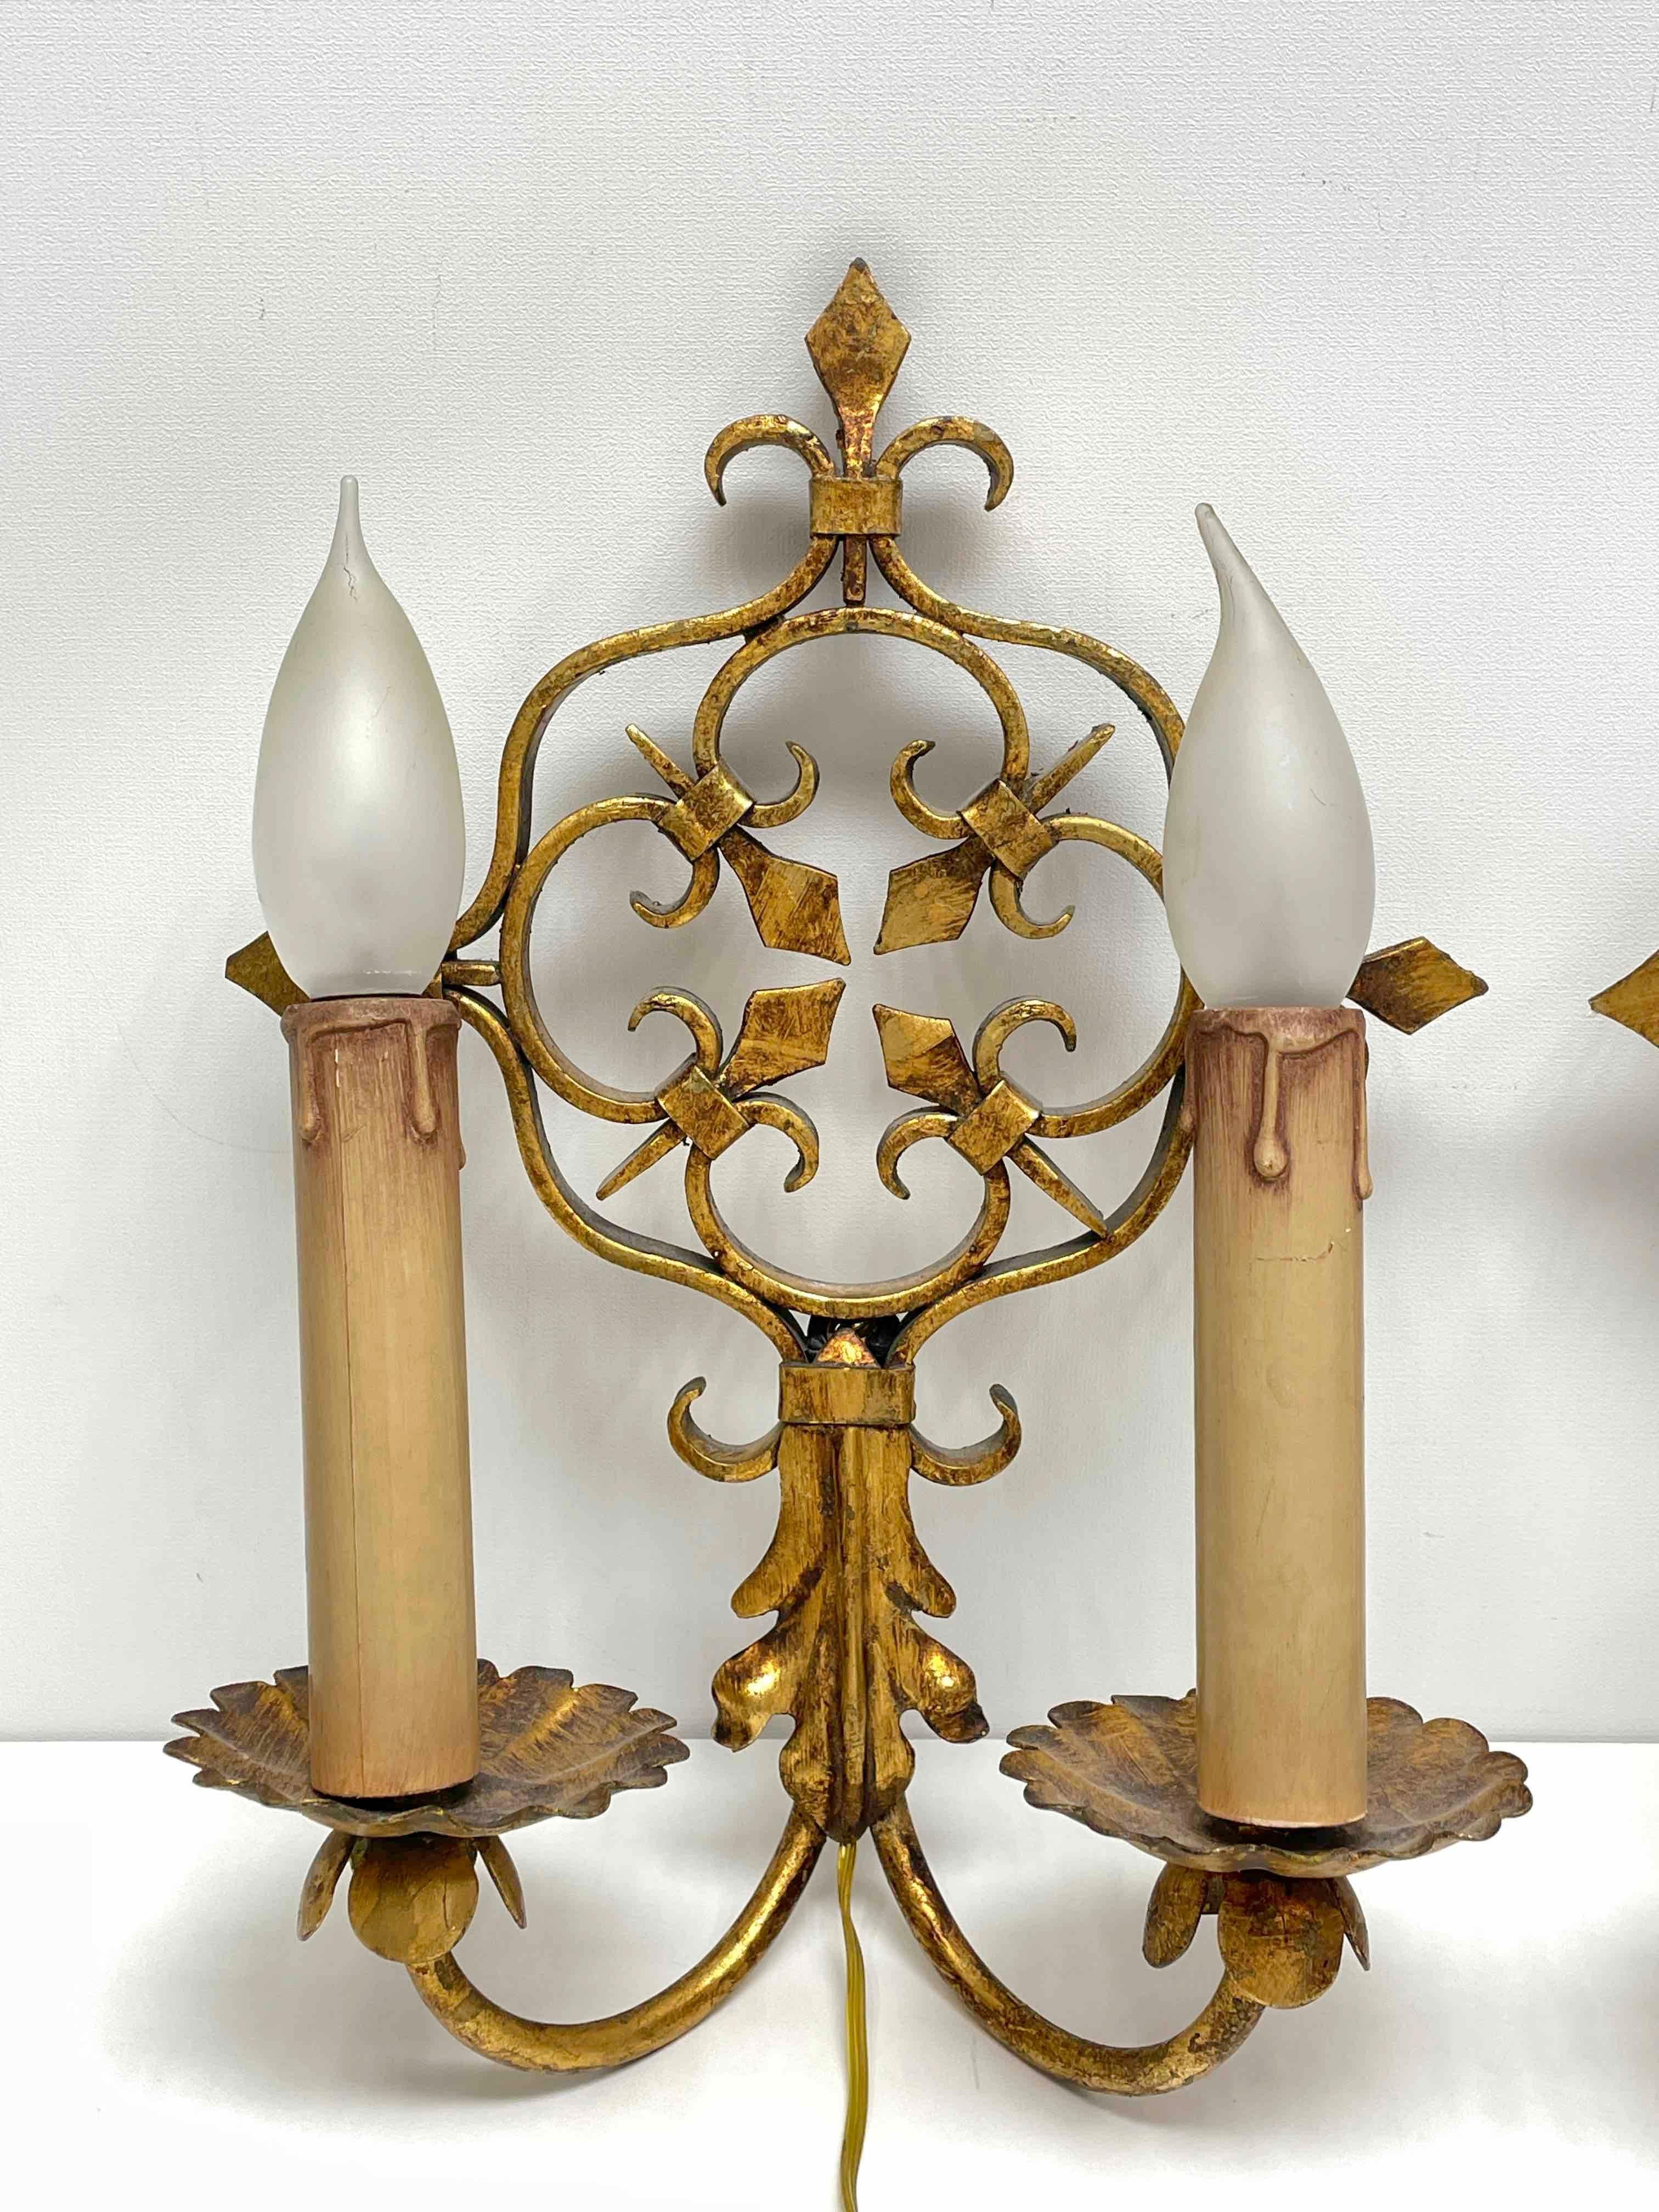 Pair of Gilt Metal Tole Toleware Sconces by Banci Firenze, Italy, 1960s For Sale 3